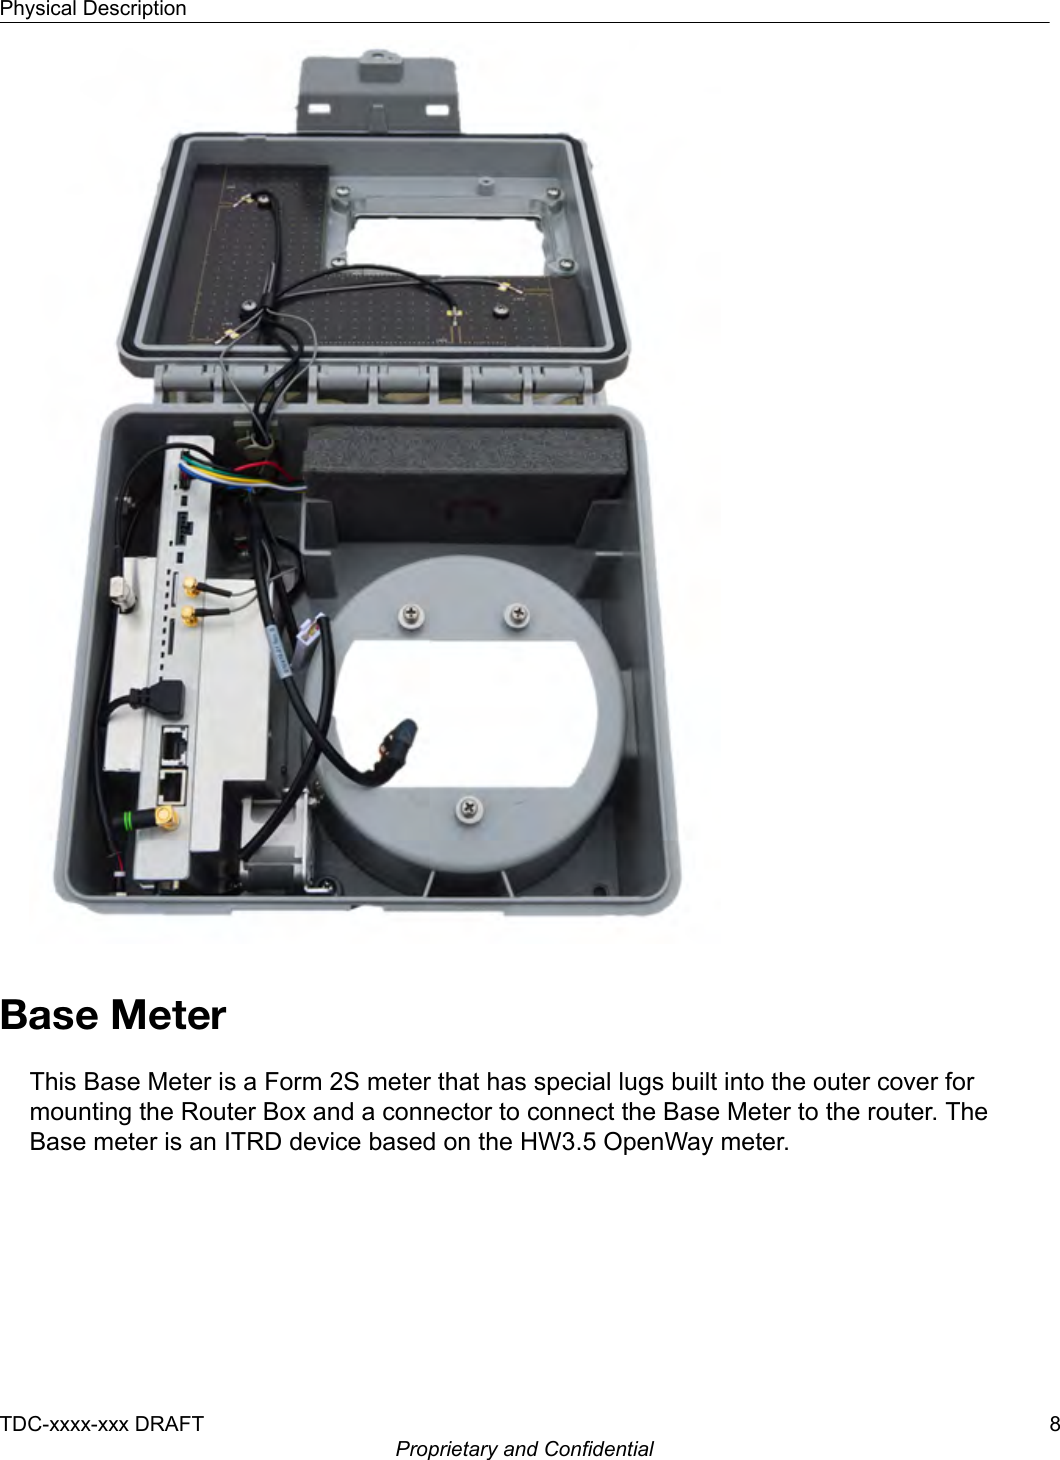 Base MeterThis Base Meter is a Form 2S meter that has special lugs built into the outer cover formounting the Router Box and a connector to connect the Base Meter to the router. TheBase meter is an ITRD device based on the HW3.5 OpenWay meter.Physical DescriptionTDC-xxxx-xxx DRAFT 8Proprietary and Confidential